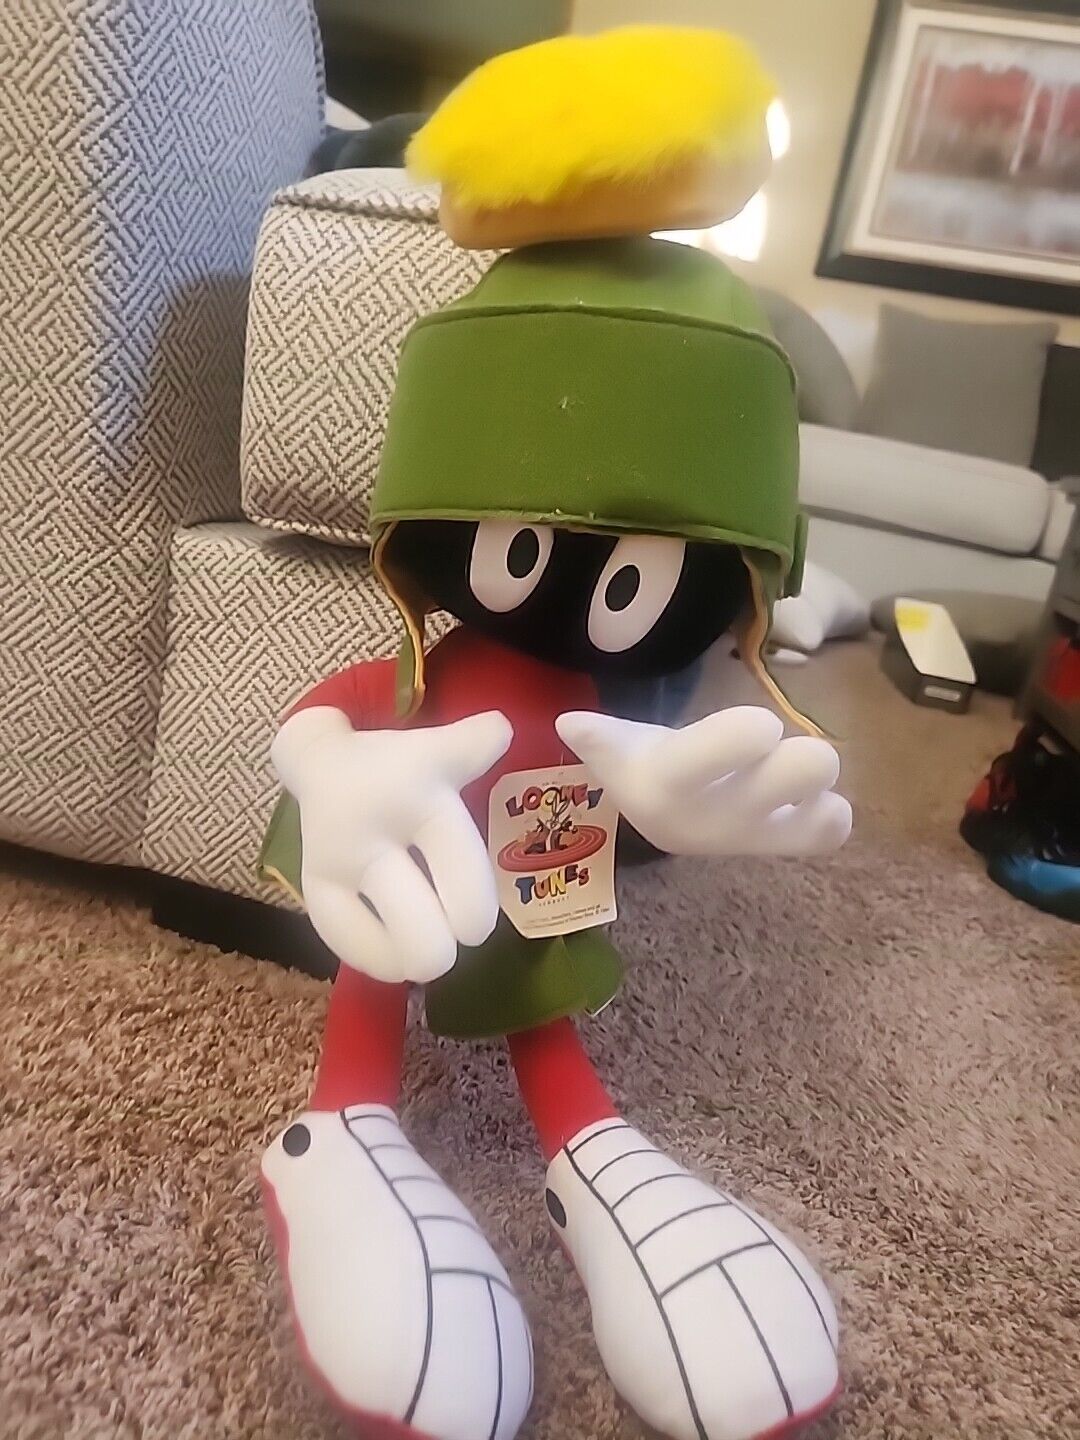 1994 Marvin the Martian Plush Stuffed Doll 13” Warner Bros Looney Tunes Applause